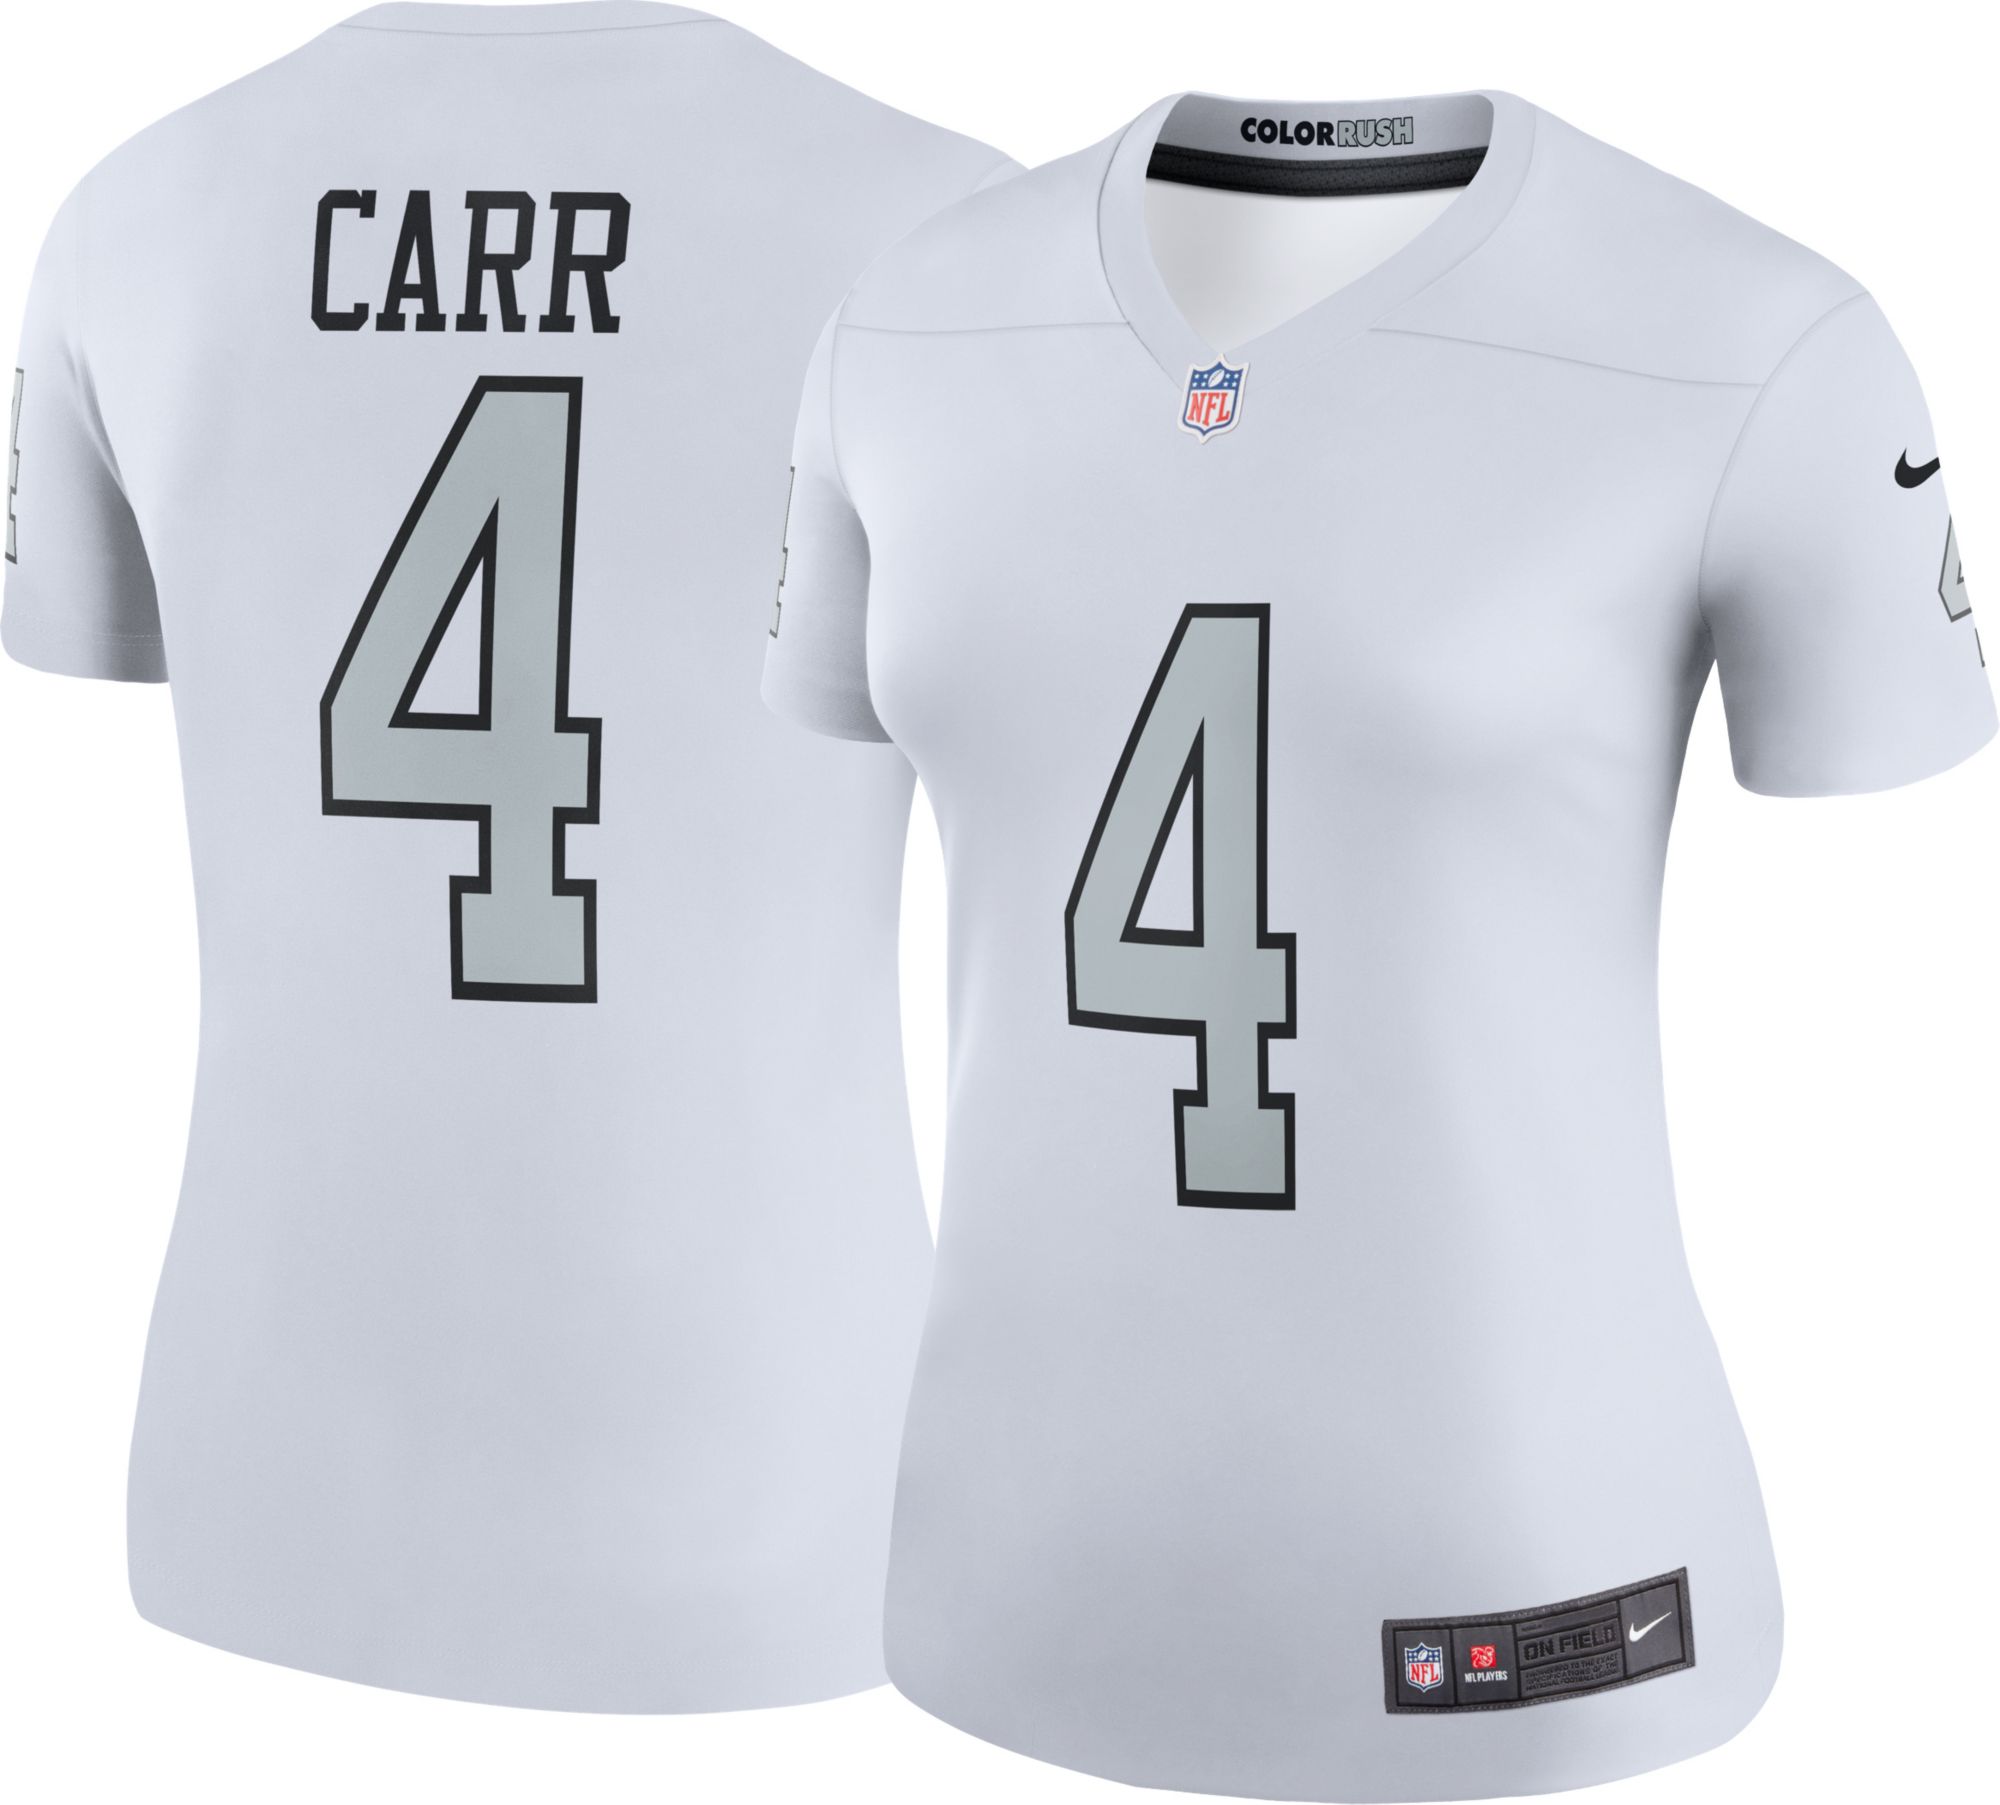 raiders jersey colors